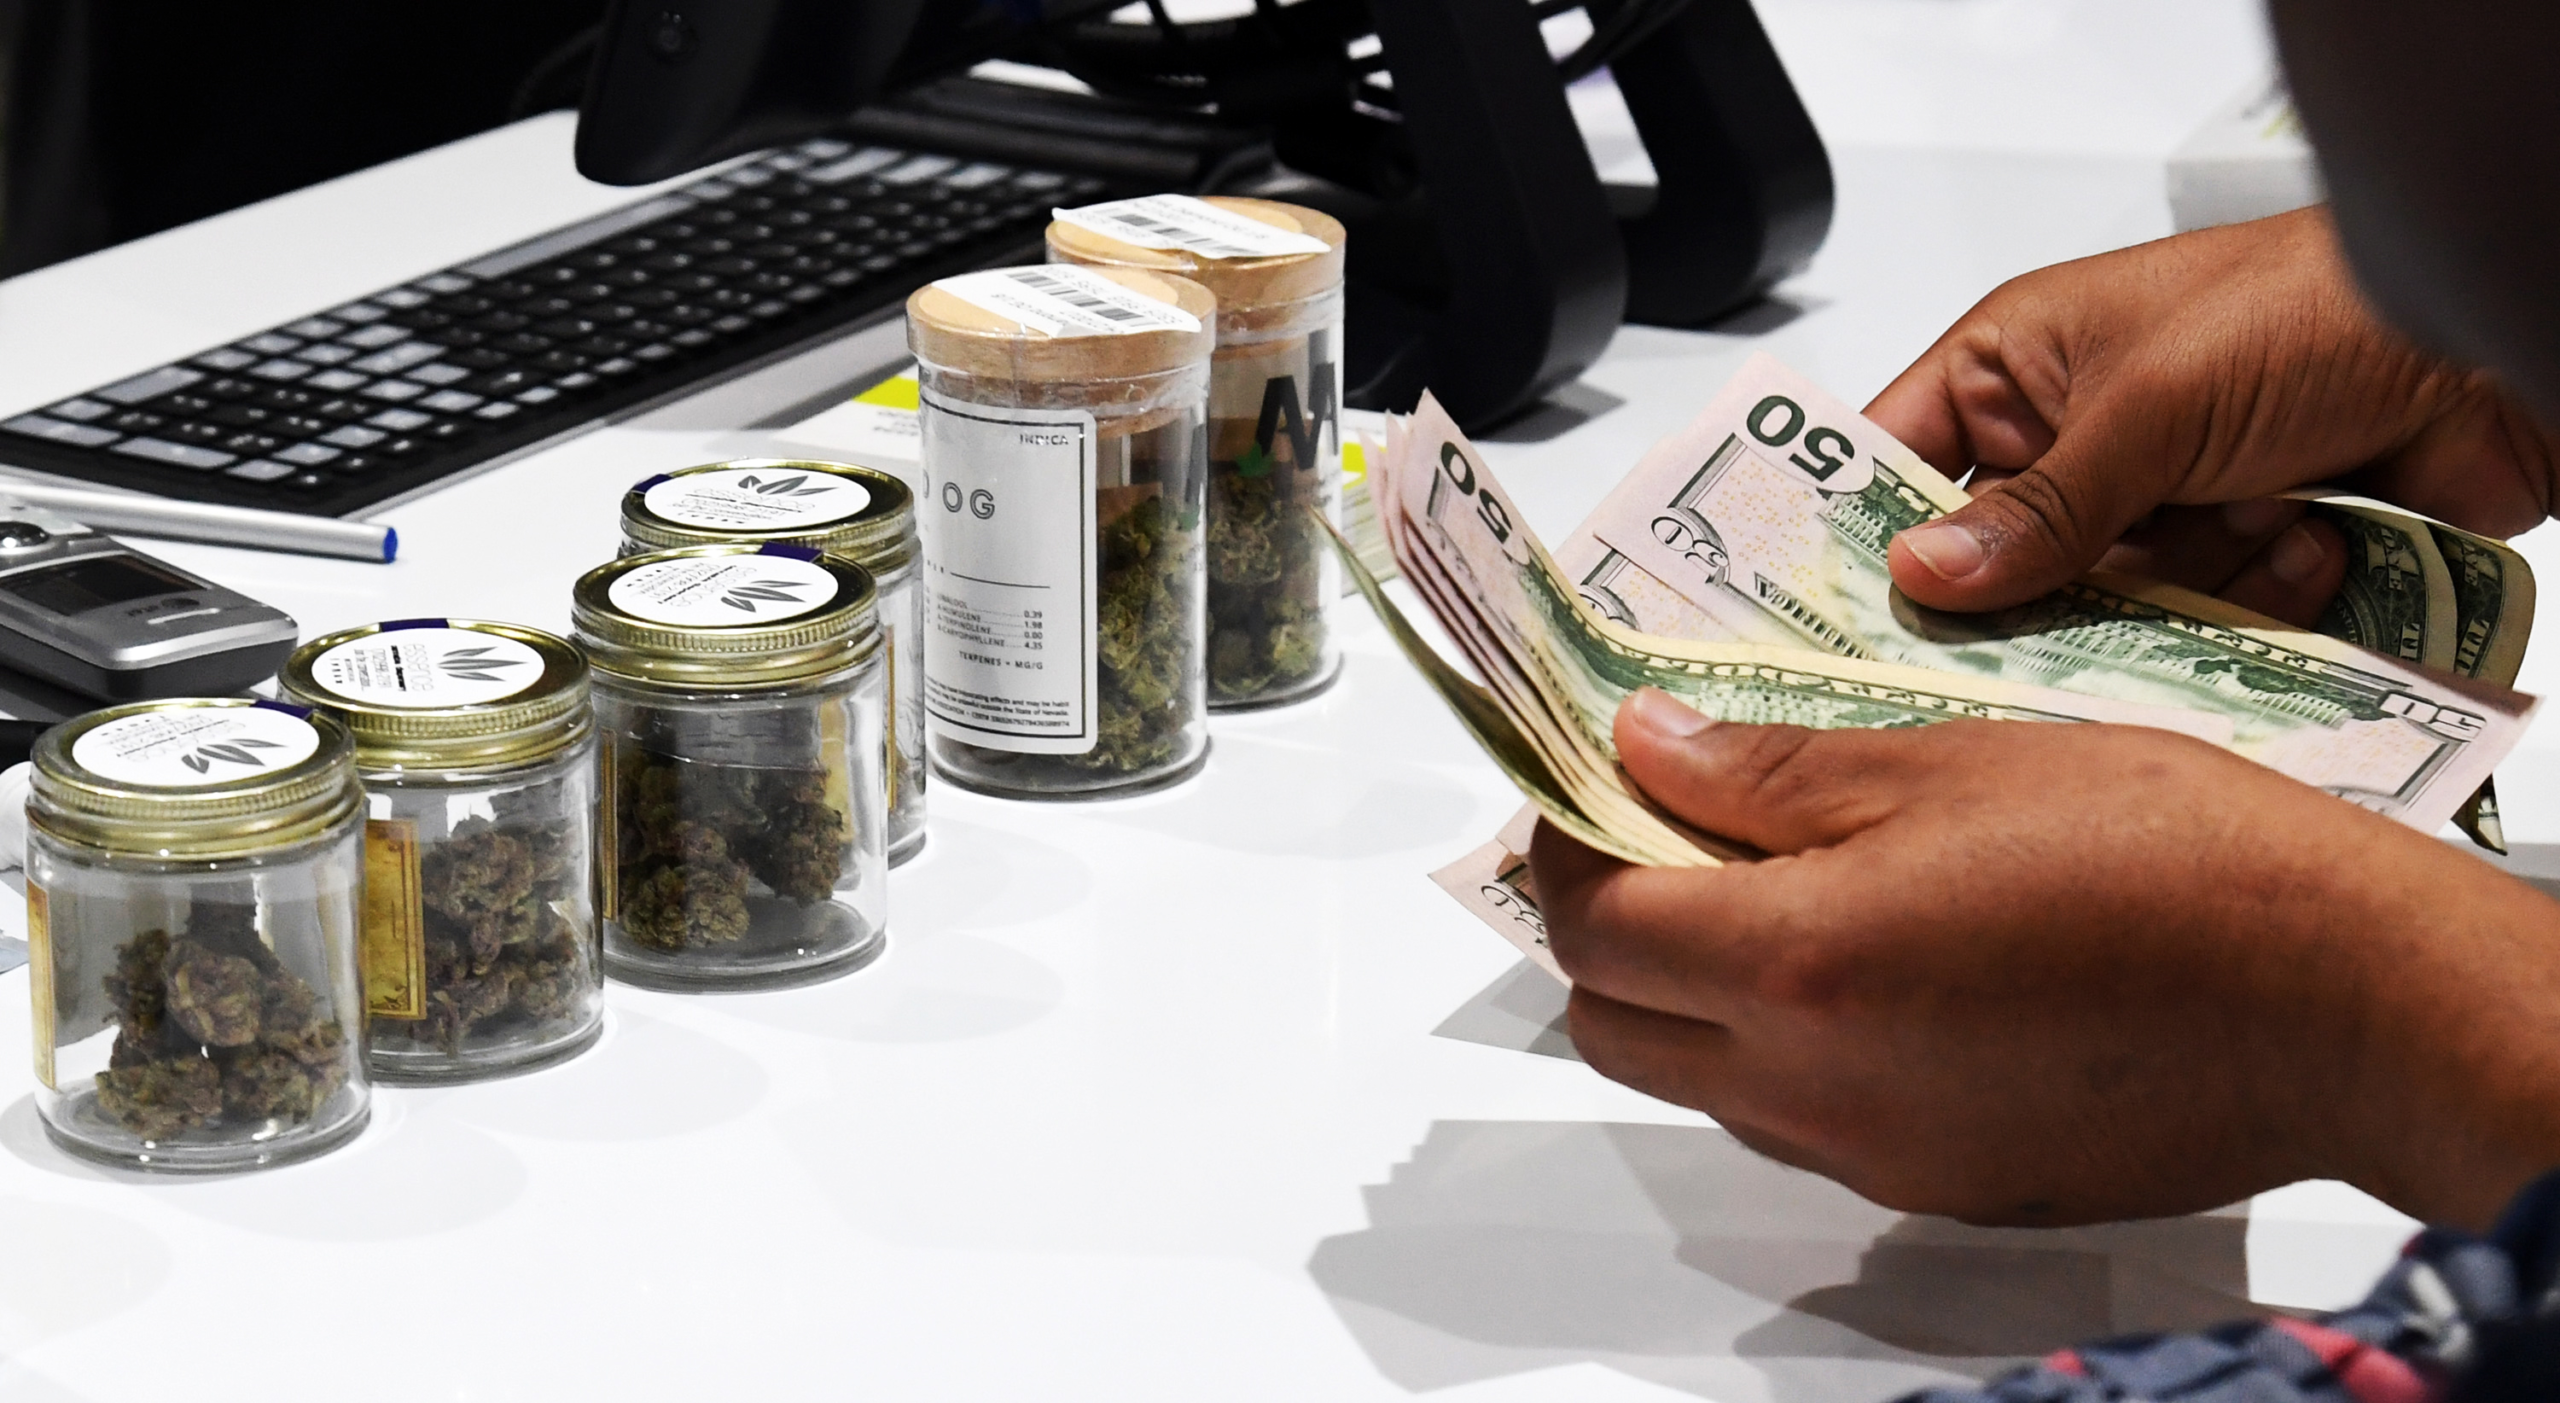 Michigan Sold a Record $210 Million Worth of Legal Weed Last Month